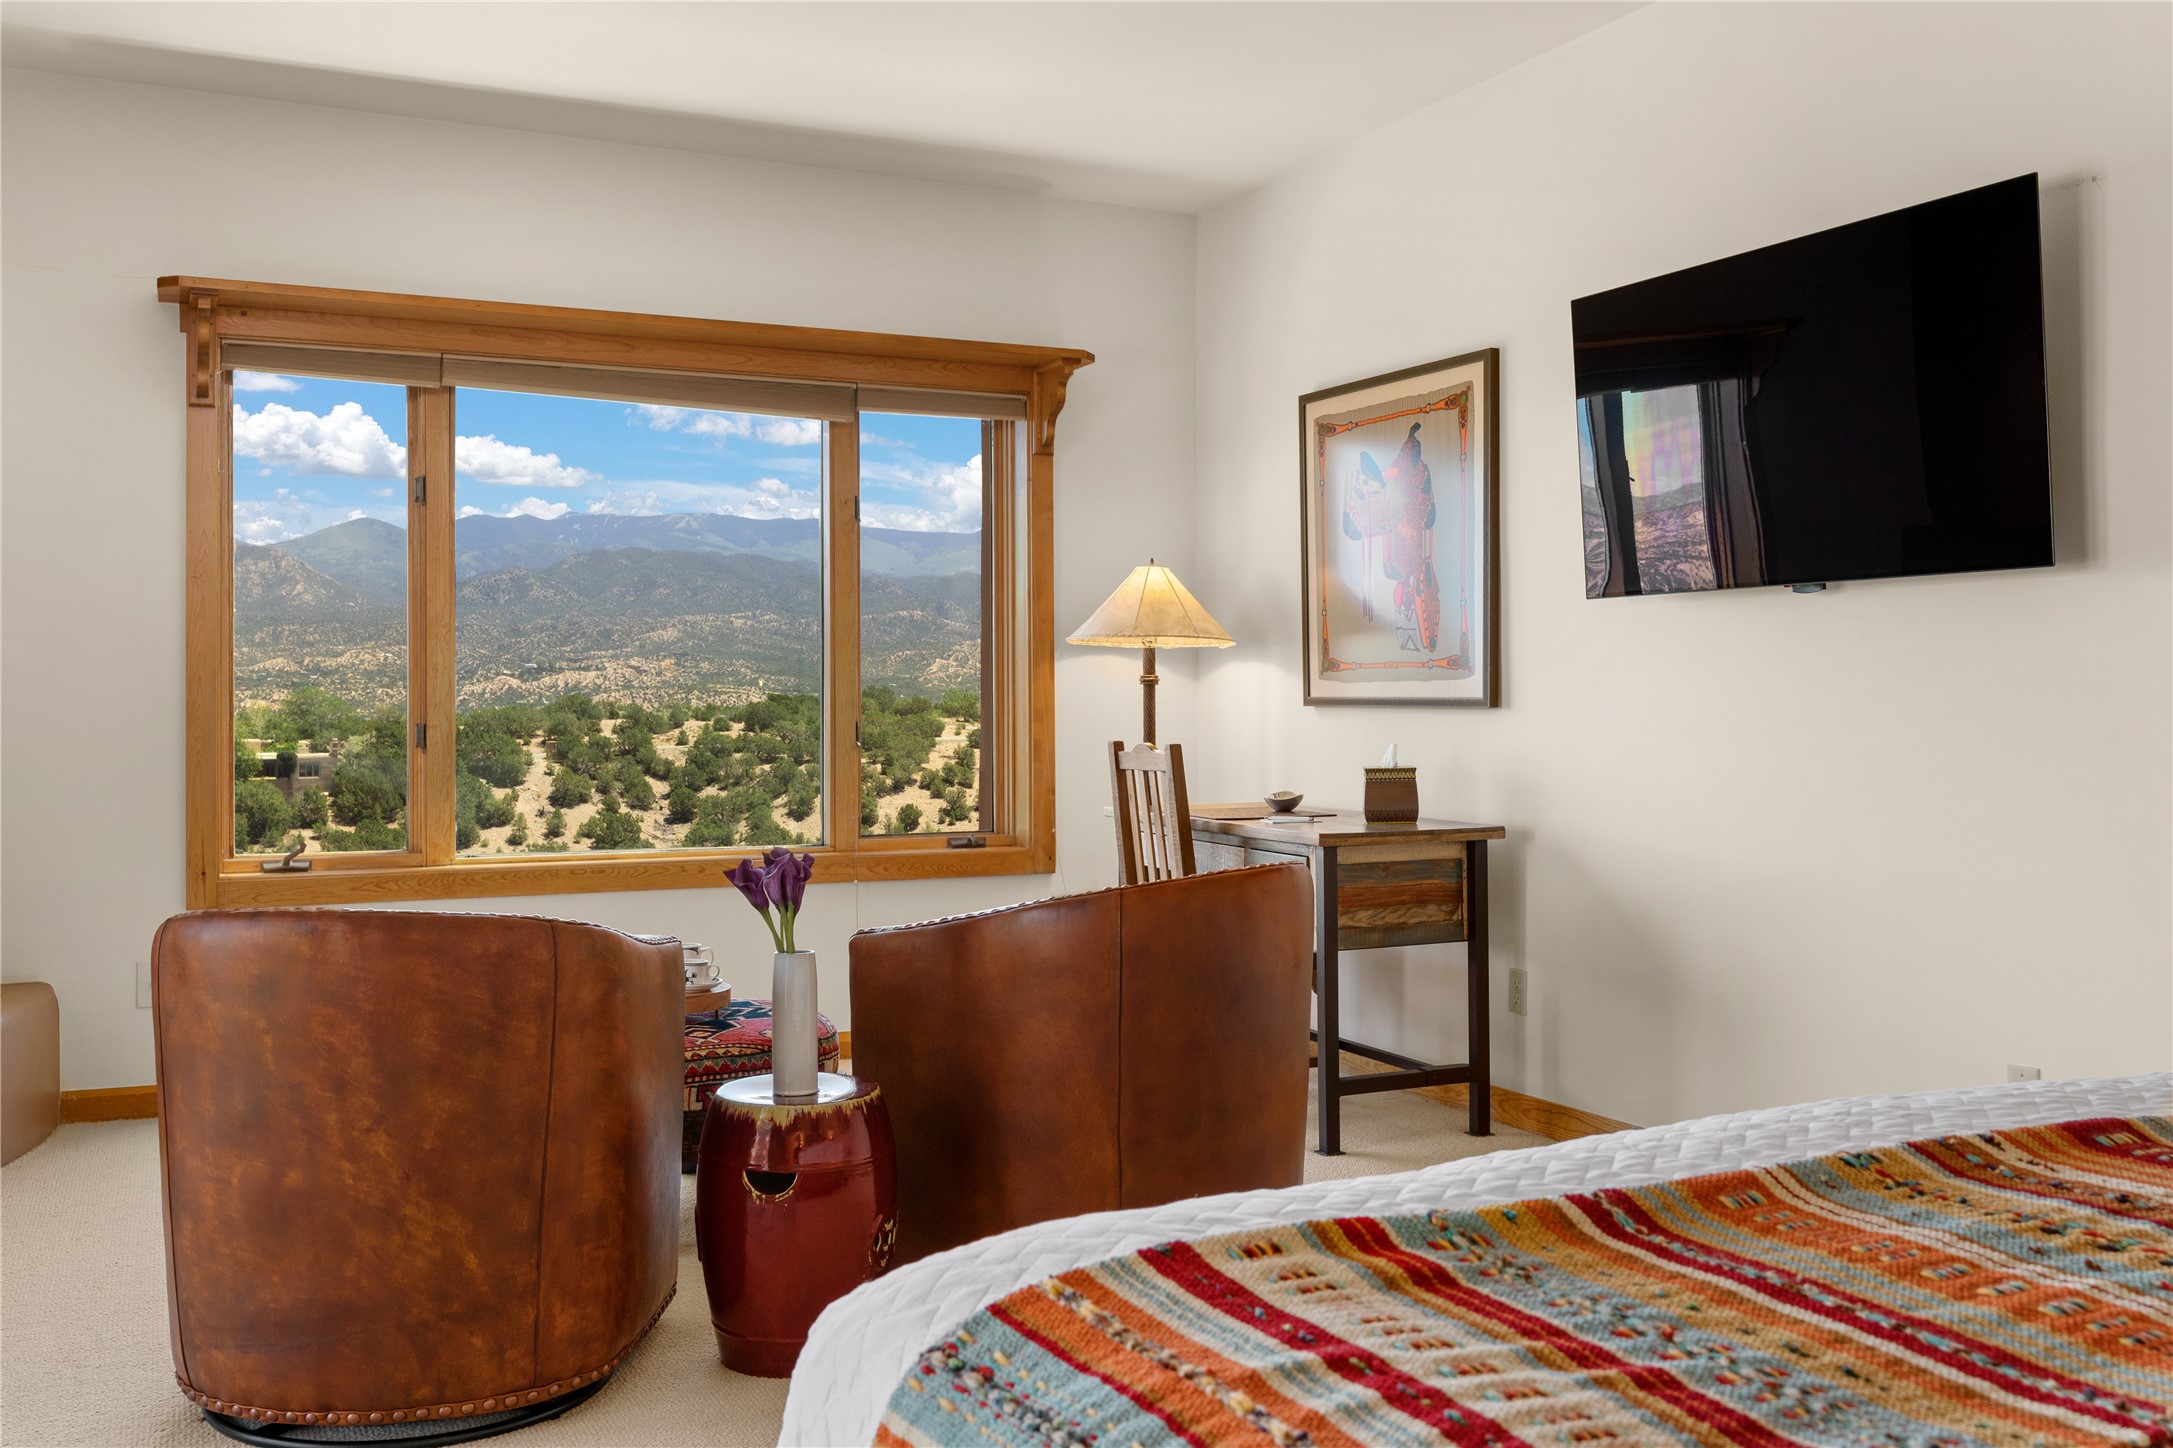 A wonderfully cozy bedroom with stunning views promises a restful night's sleep.